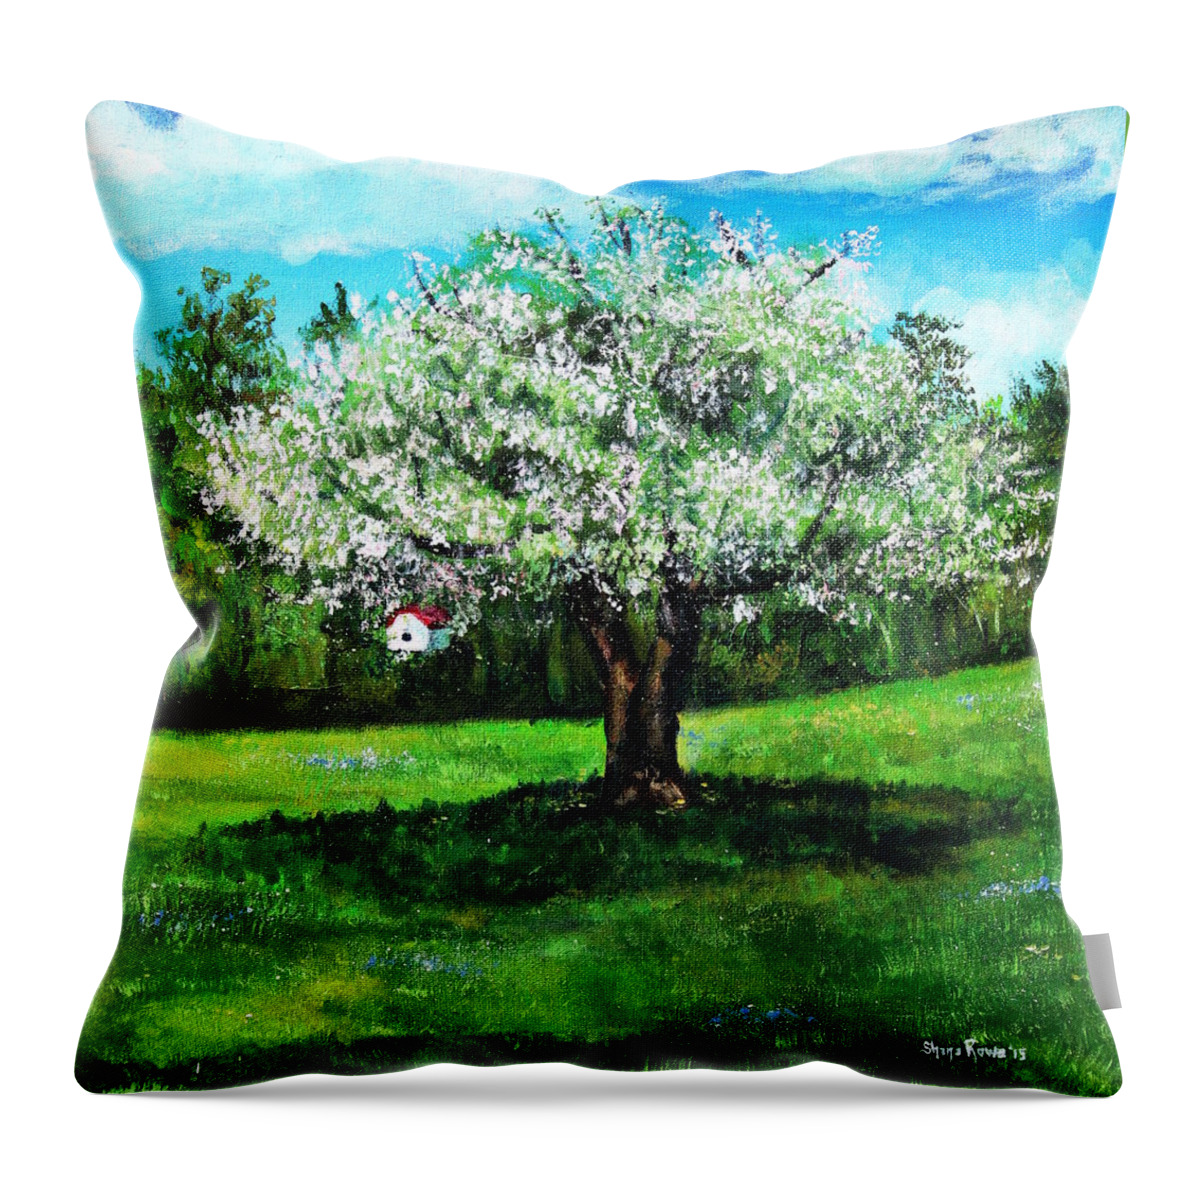 Apple Blossom Throw Pillow featuring the painting In Full Bloom by Shana Rowe Jackson